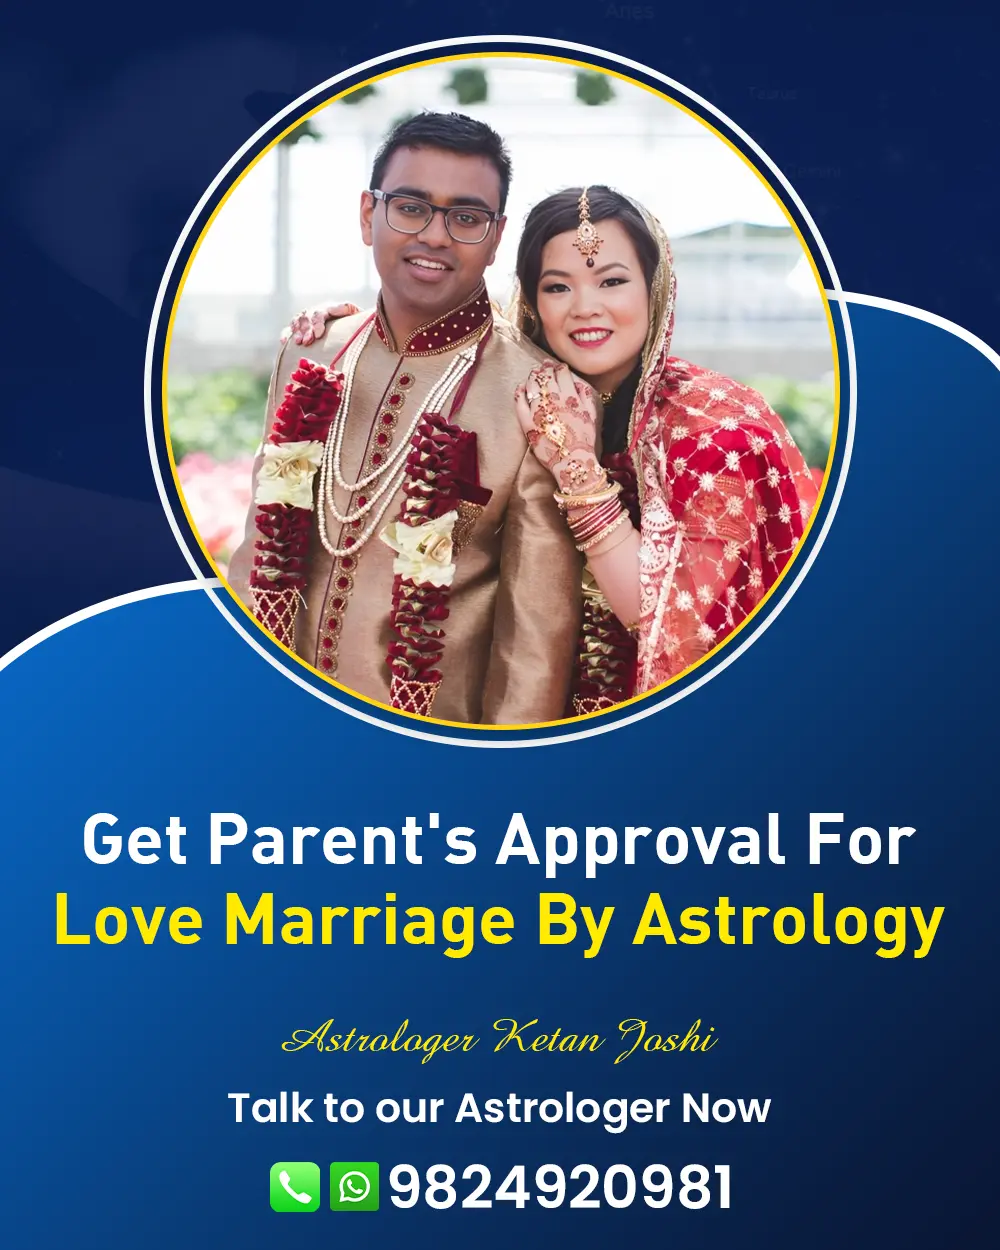 Love Marriage Astrologer In Anand